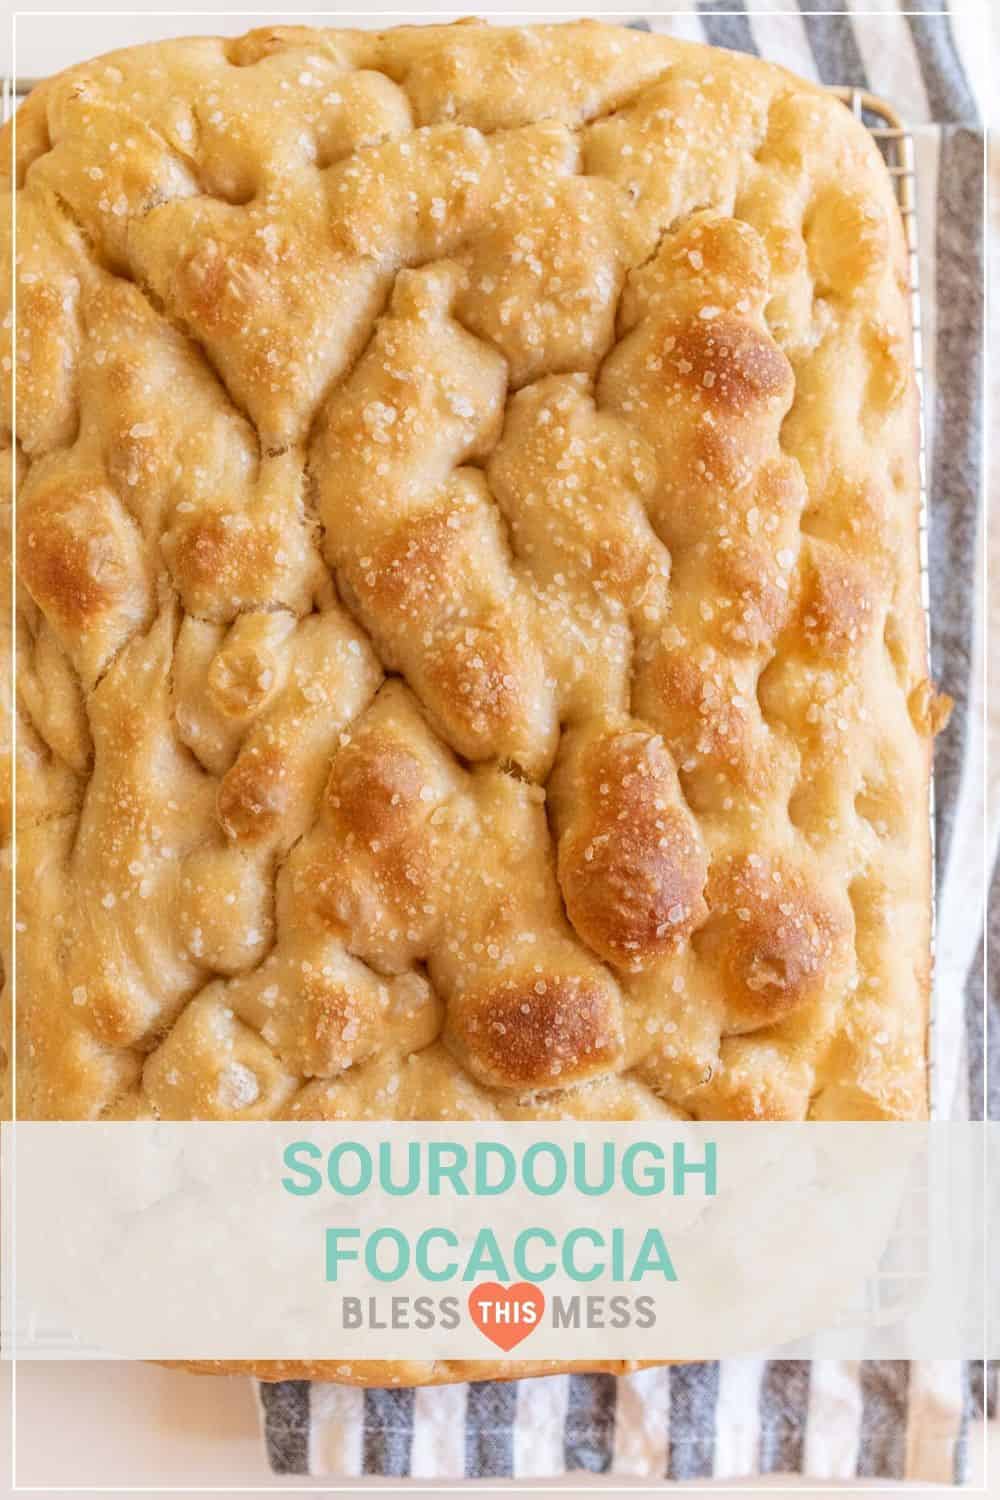 https://www.blessthismessplease.com/wp-content/uploads/2020/06/SOURDOUGH-FOCACCIA-PIN-Bless-This-Mess-1.jpg